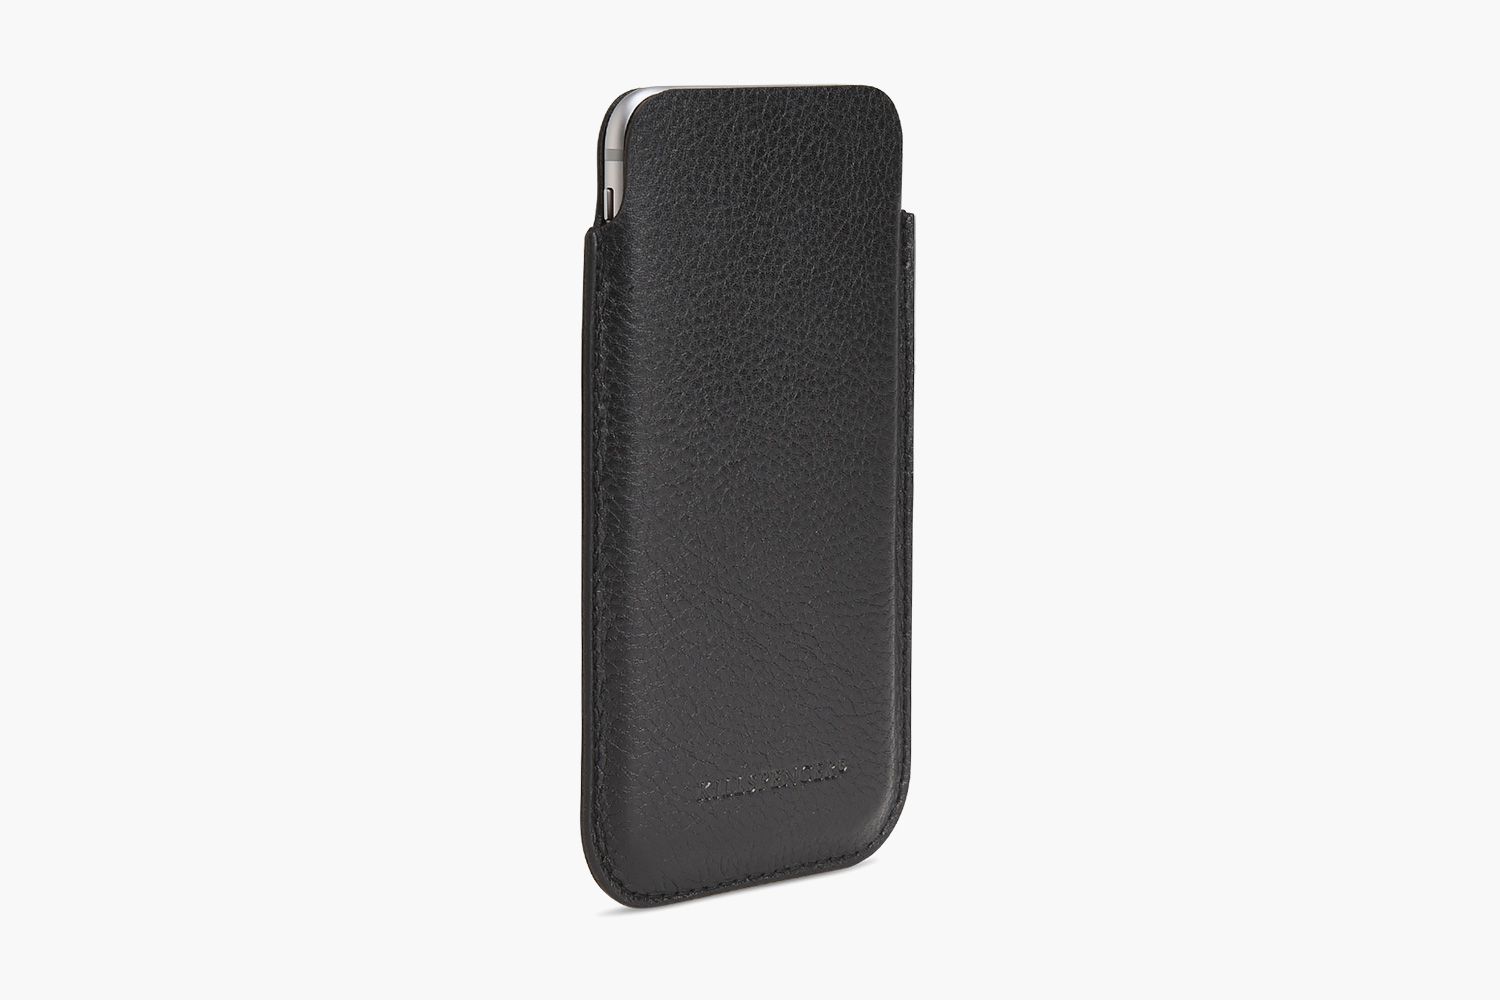 killspencer-iphone-6-and-iphone-6-plus-accessories-collection-08